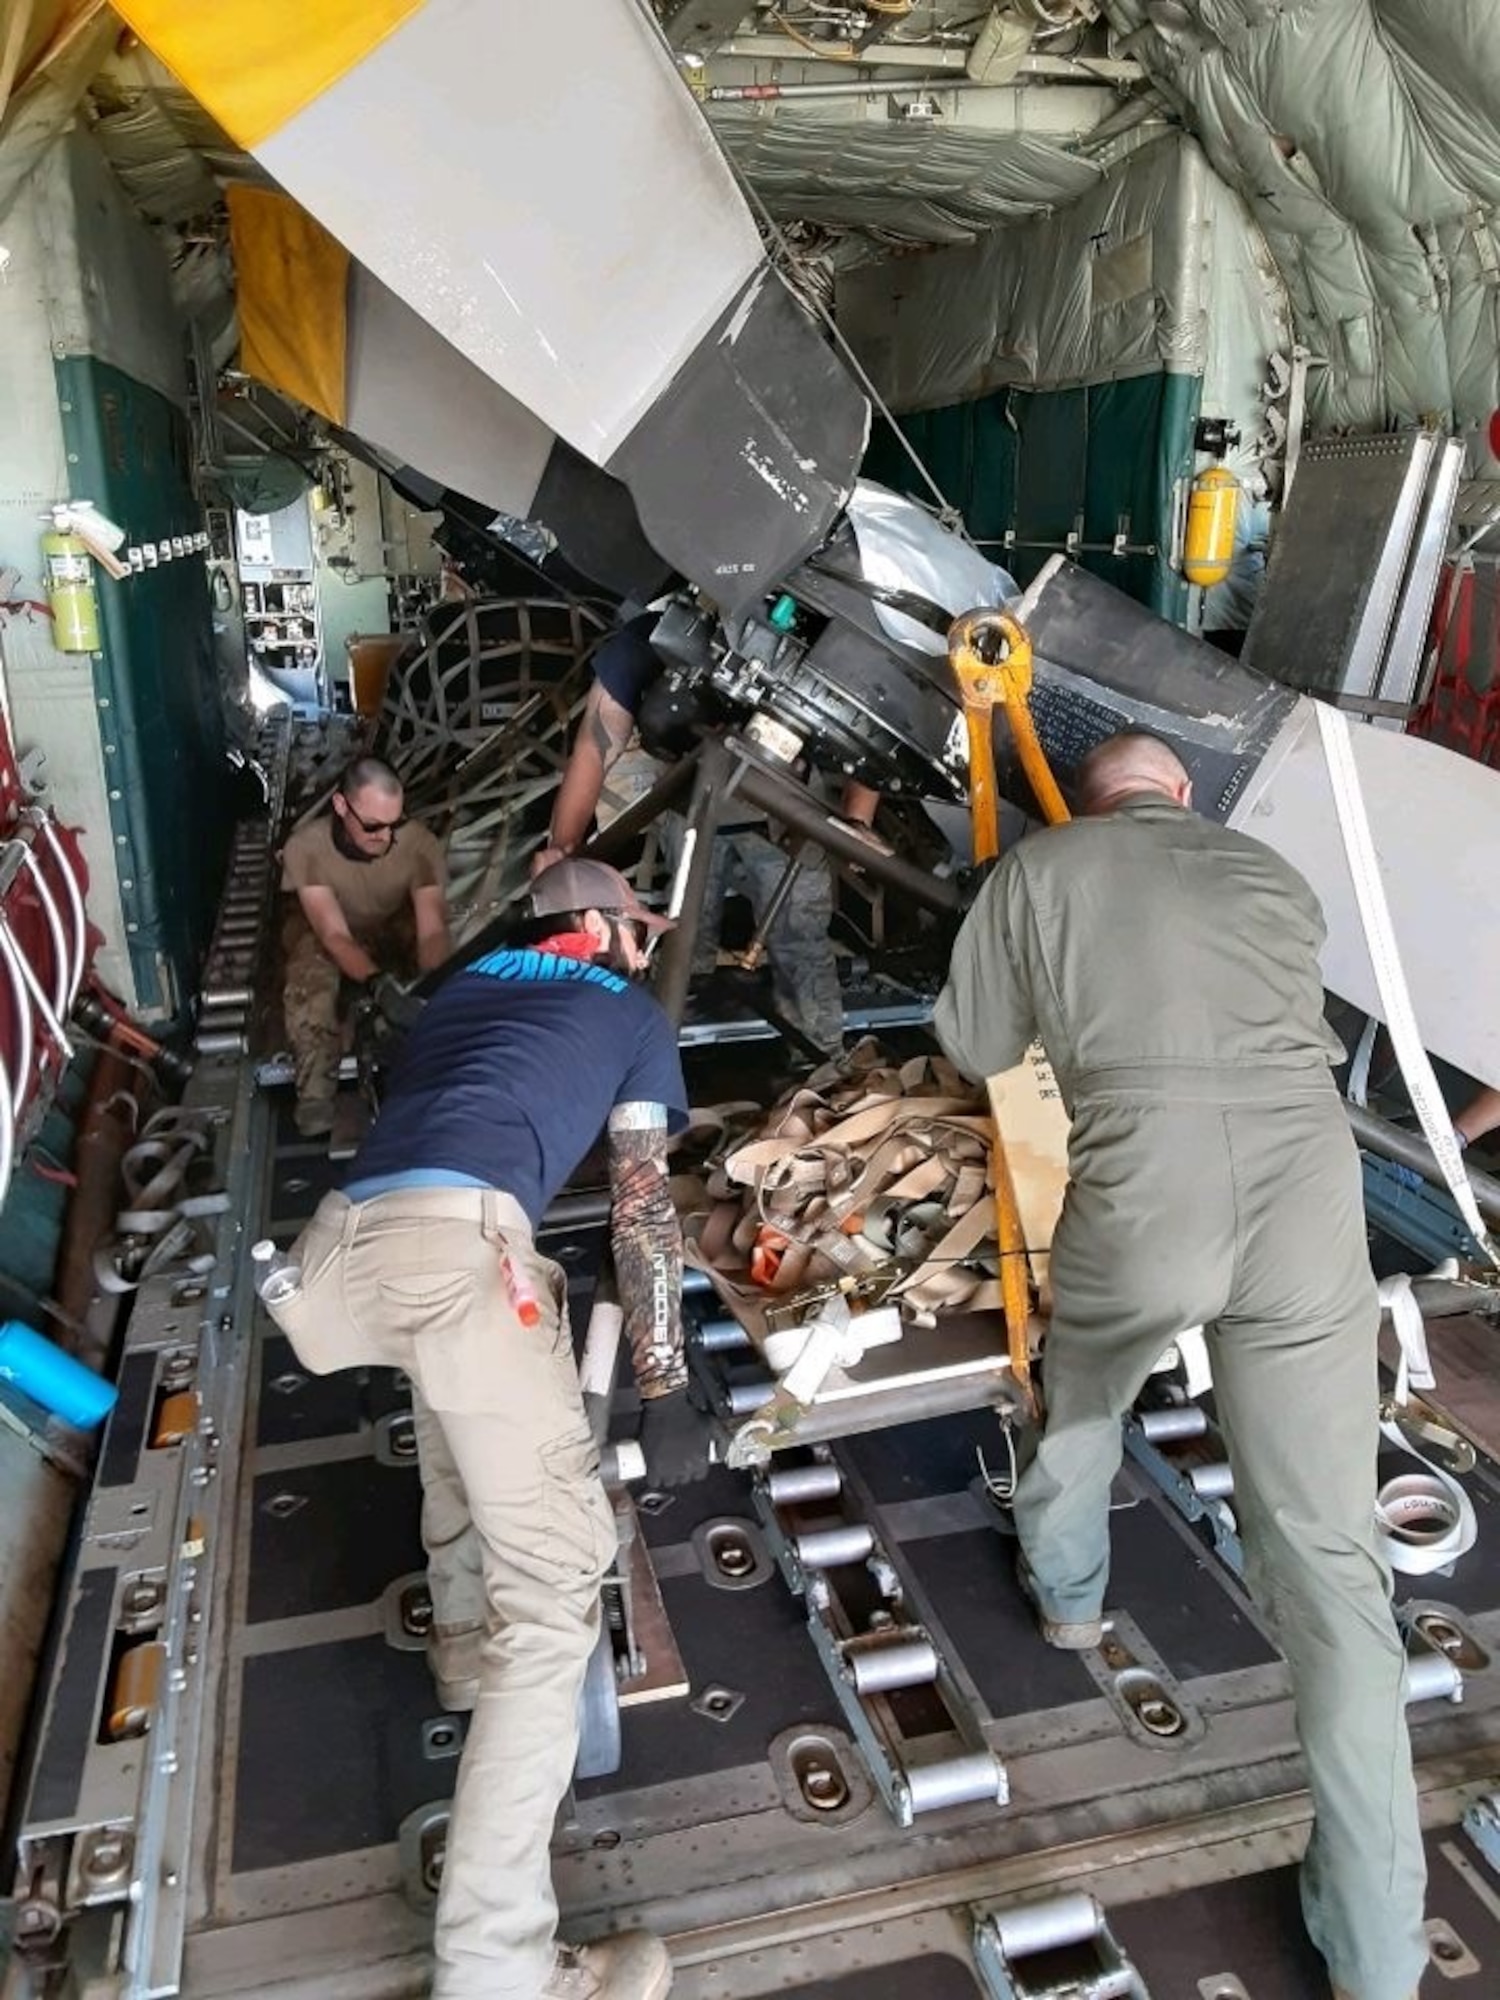 514th Flight Test Squadron aircrew and 309th Aerospace Maintenance and Regeneration Group personnel pushing a propeller in the back of an aircraft.